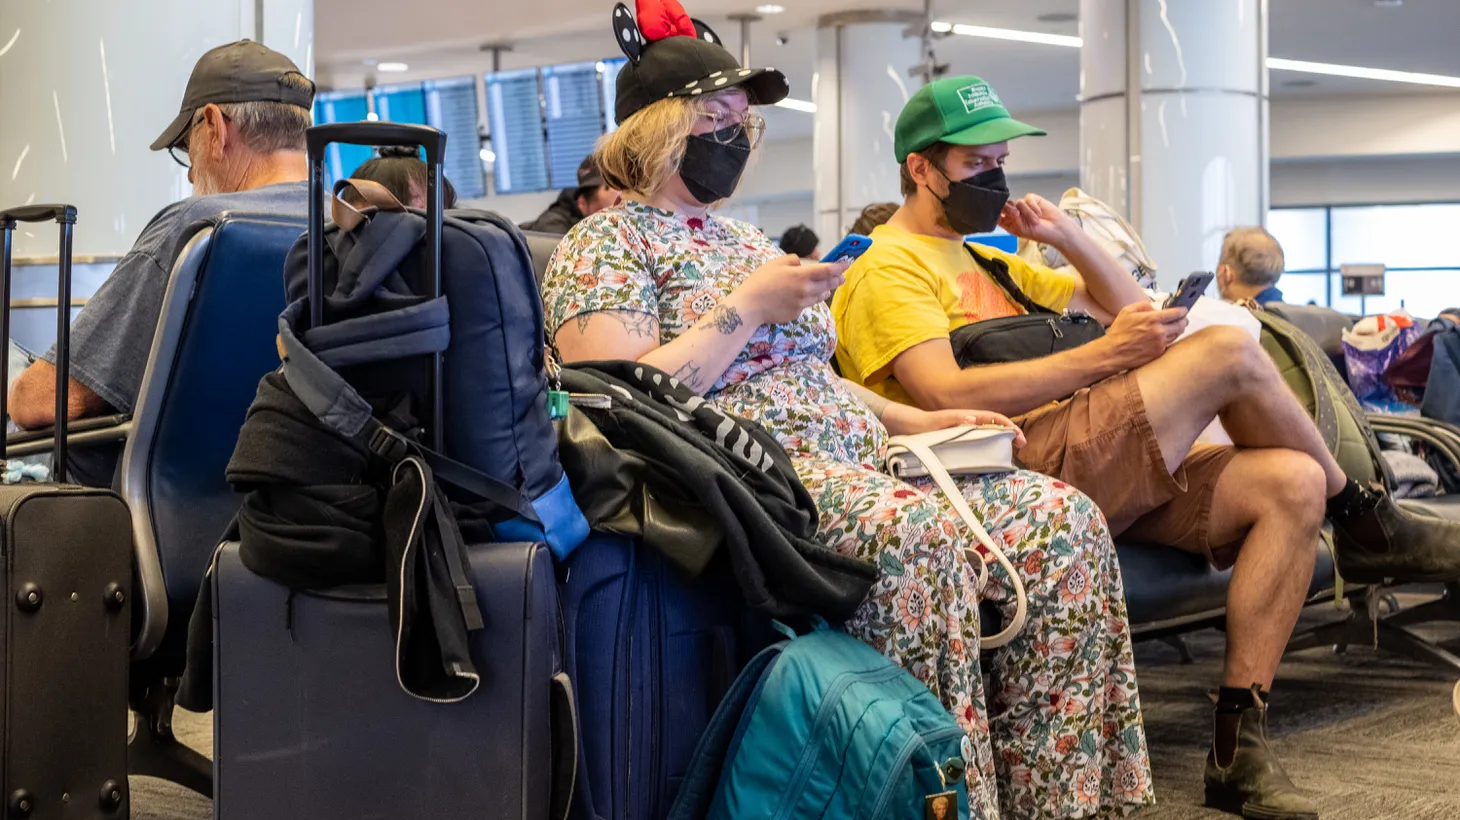 A woman wears a face mask and Minnie House hat while waiting to board a flight at LAX airport, May 22, 2022. Summer is usually travel season, but the COVID forecast doesn’t look promising since cases are up in the state.